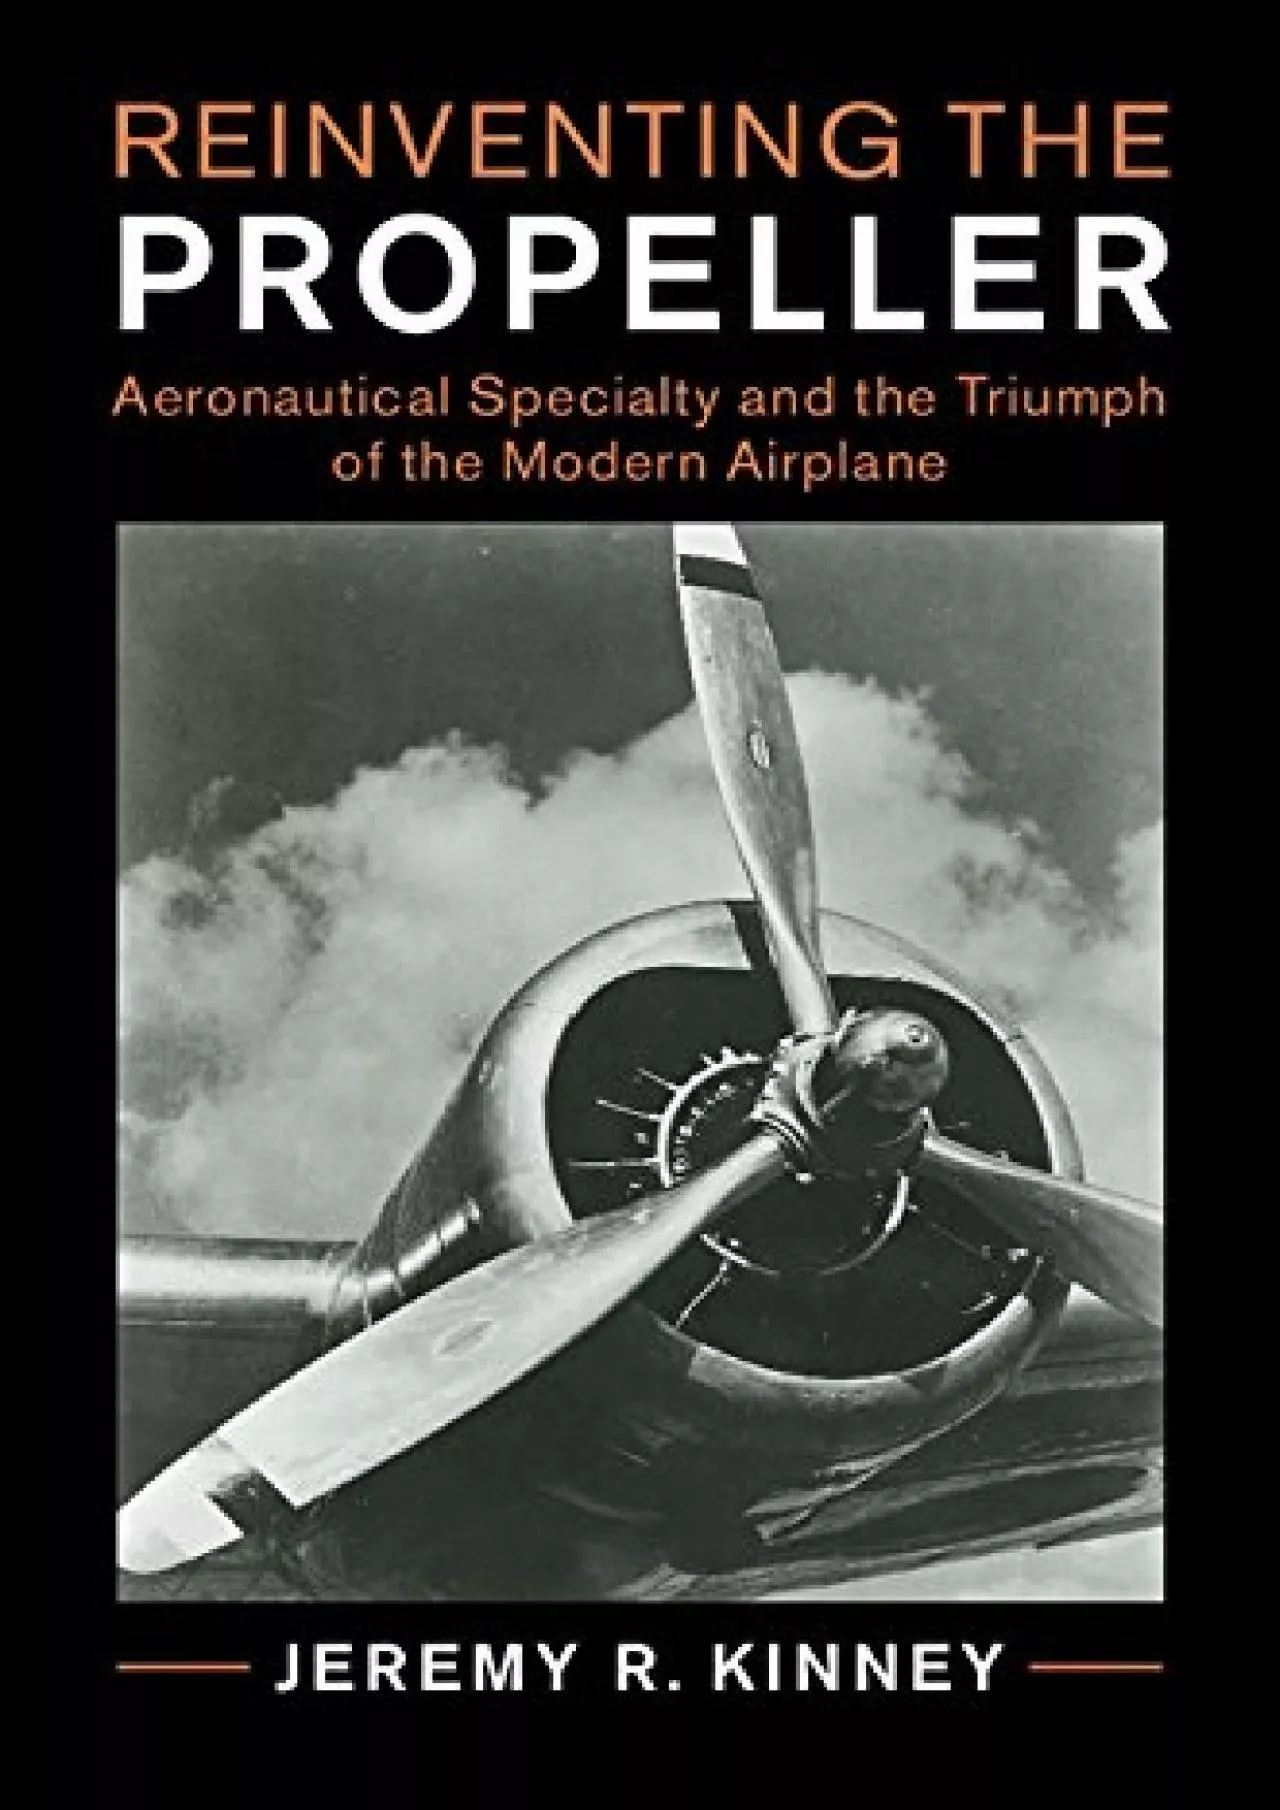 (EBOOK)-Reinventing the Propeller: Aeronautical Specialty and the Triumph of the Modern